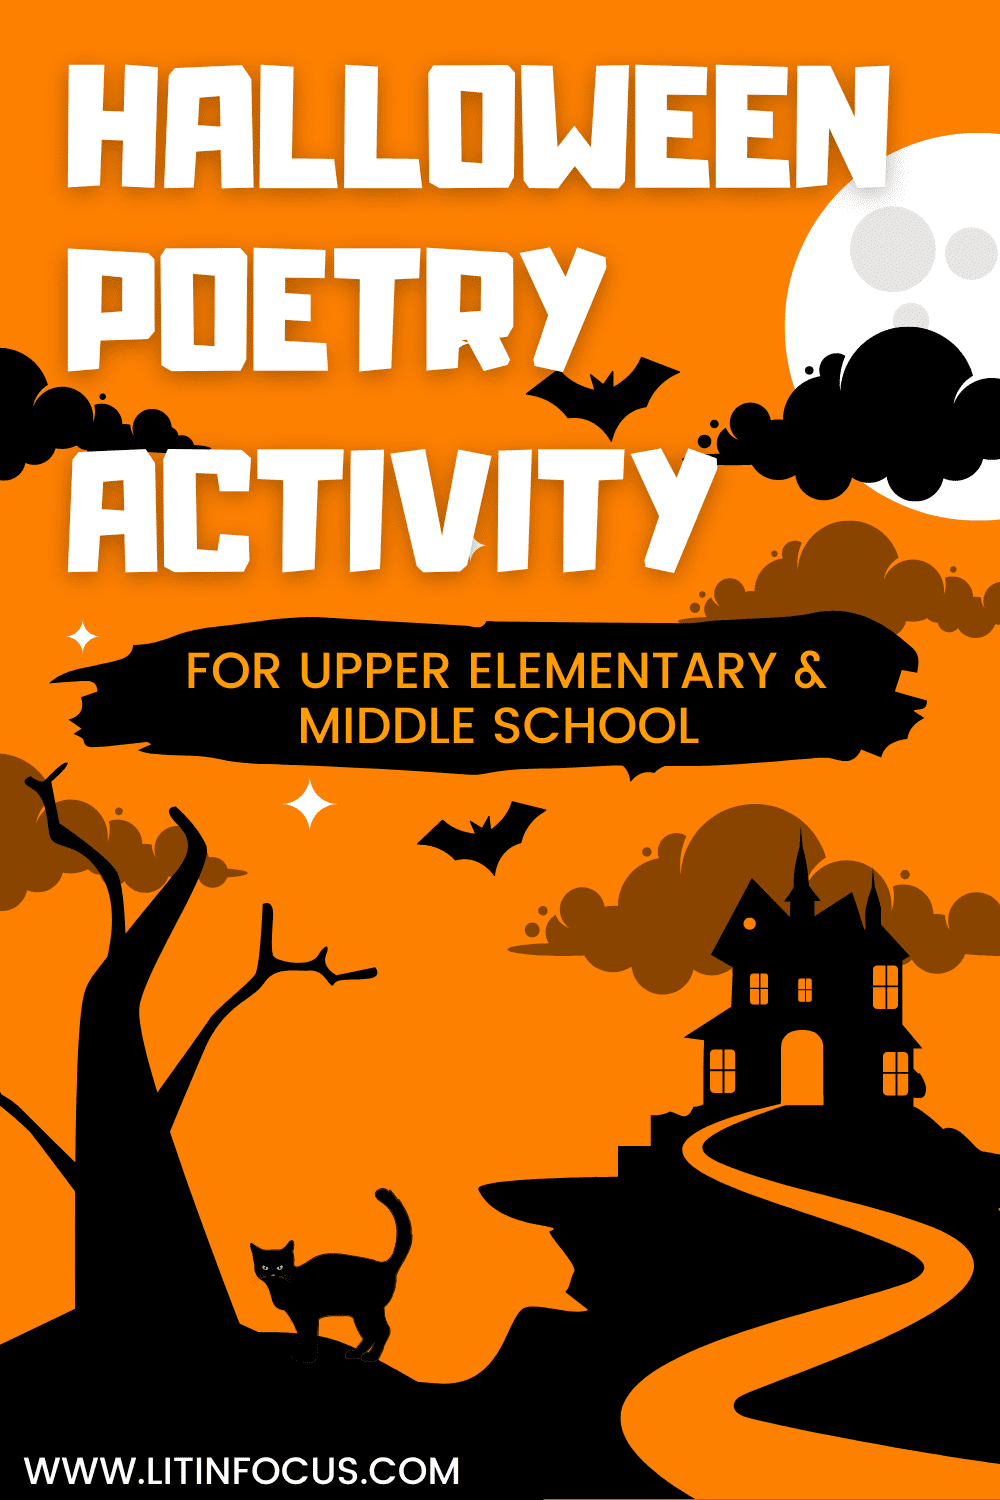 Halloween Poetry Activity for Upper Elementary and Middle School